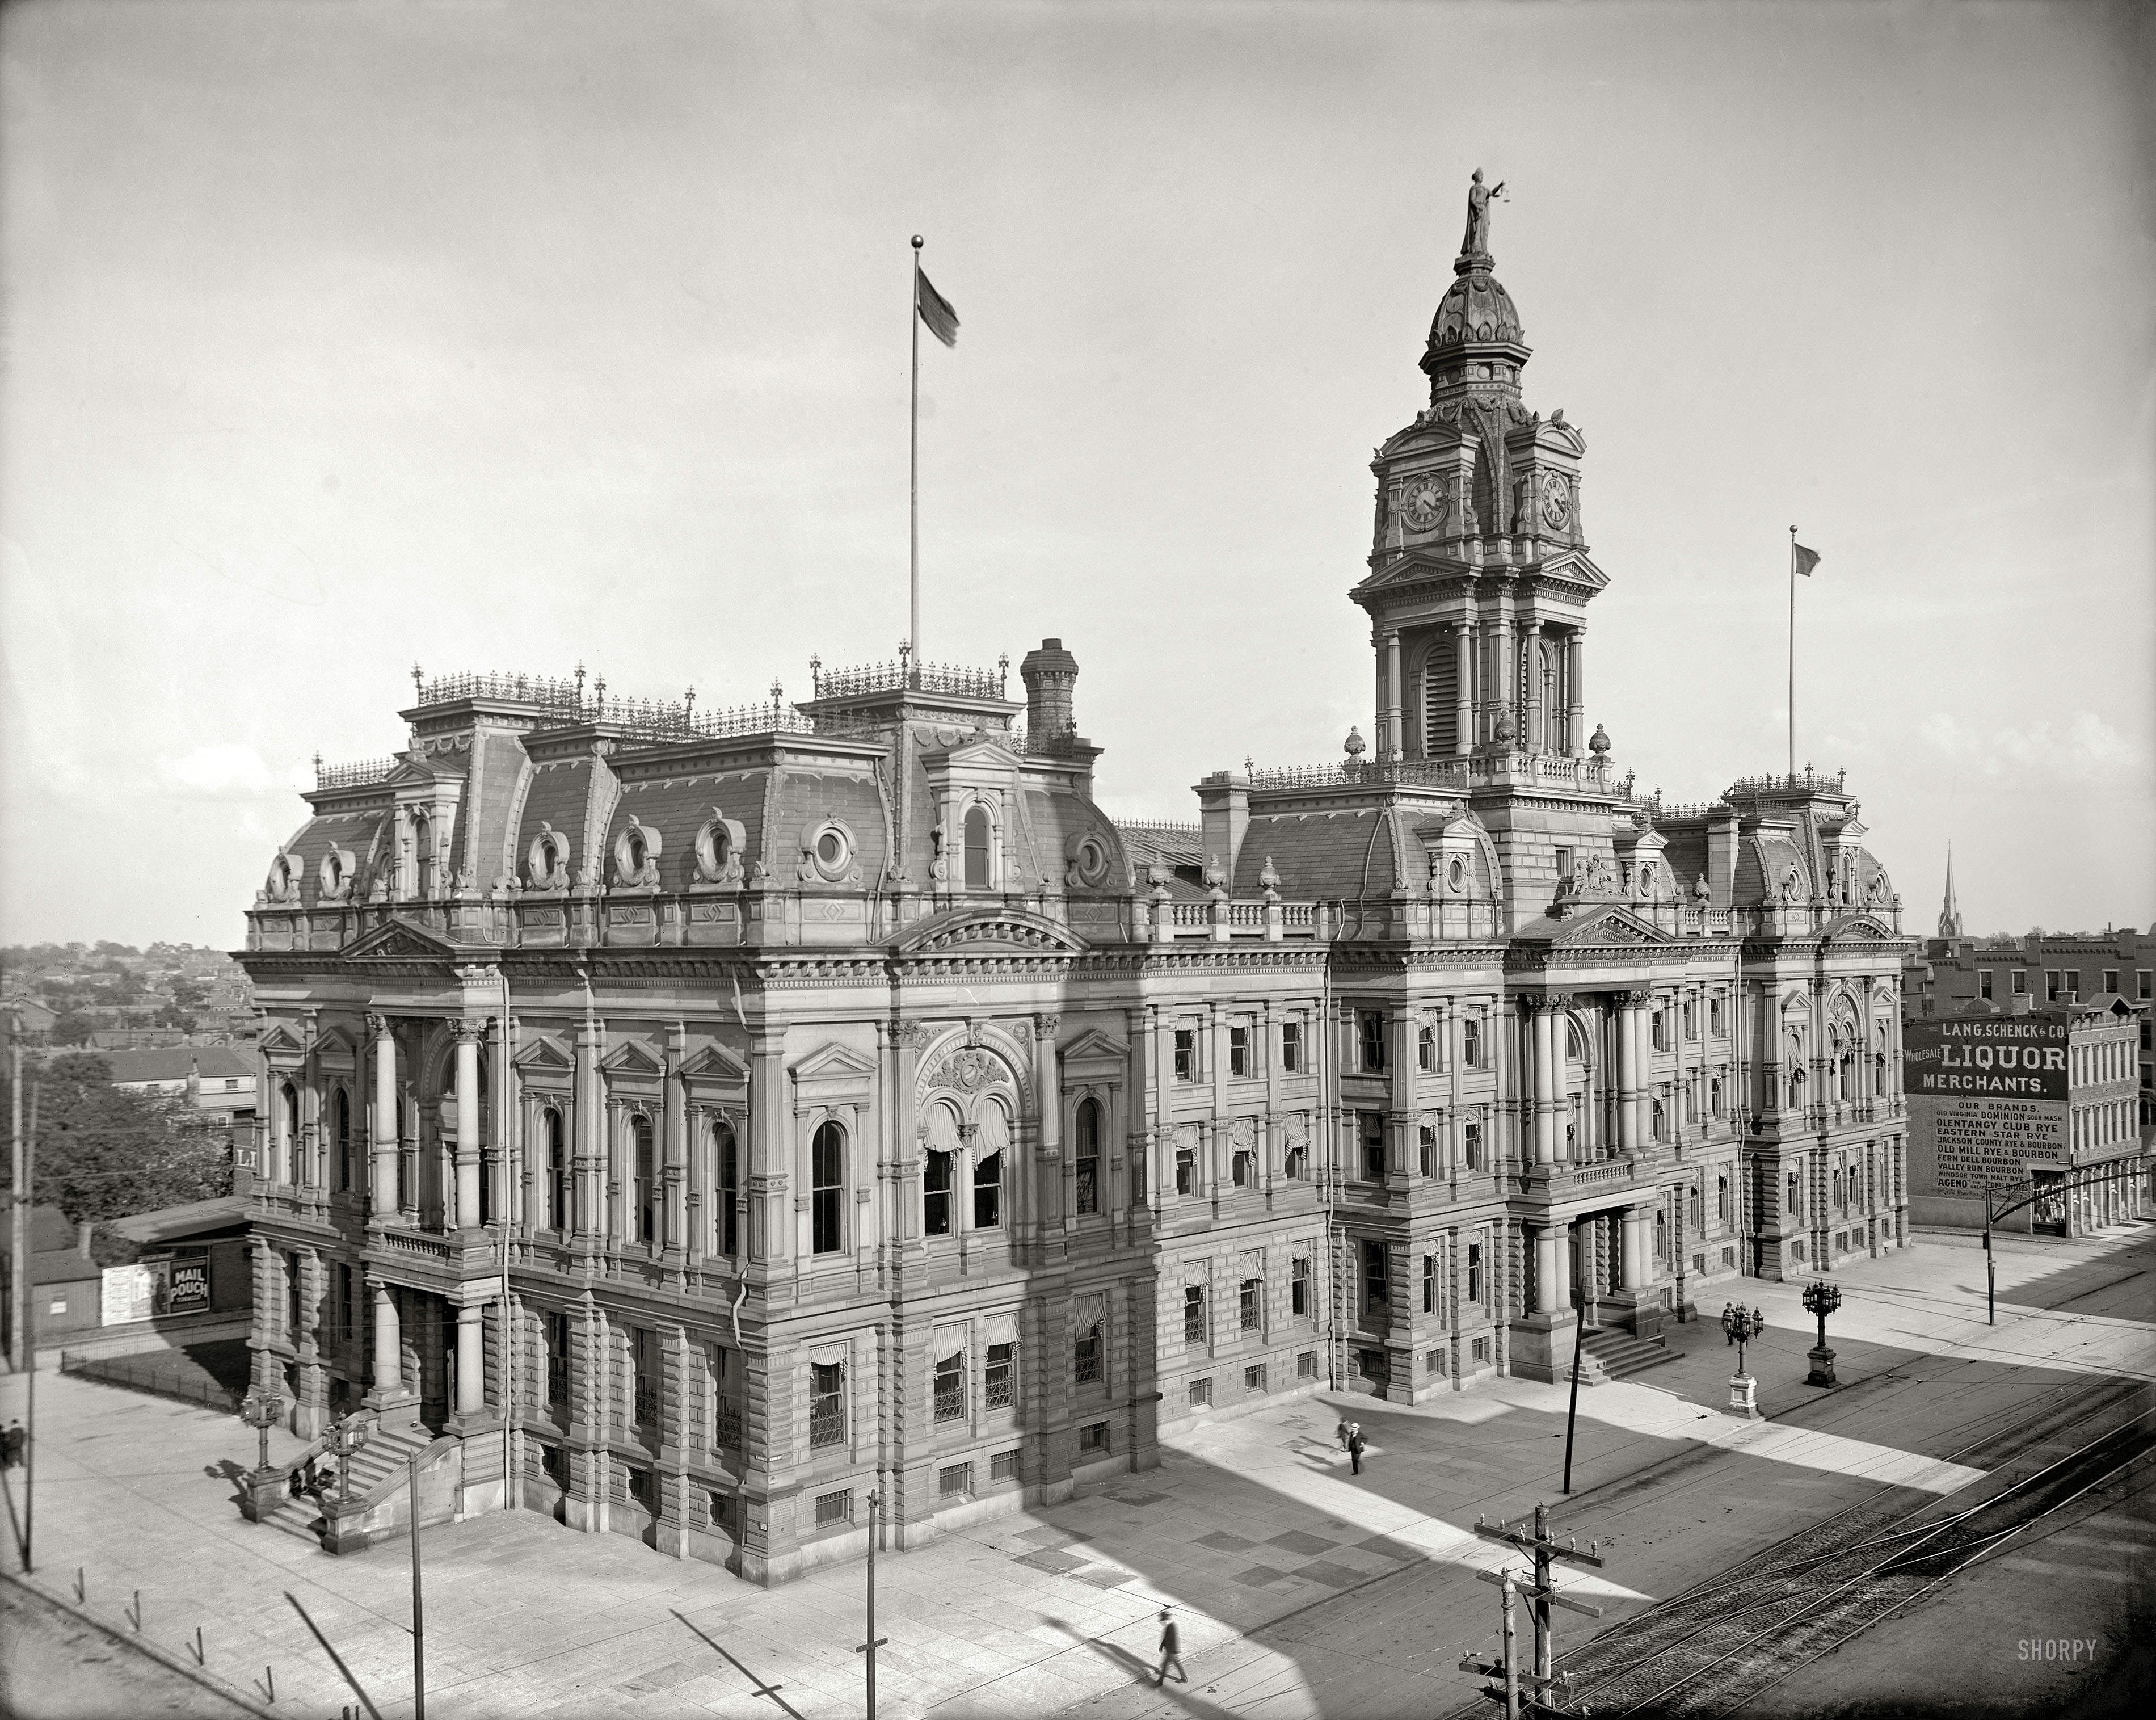 Circa 1907. "Courthouse, Columbus, O." Justice, bookended by tobacco and liquor. 8x10 inch glass negative, Detroit Publishing Company. View full size.